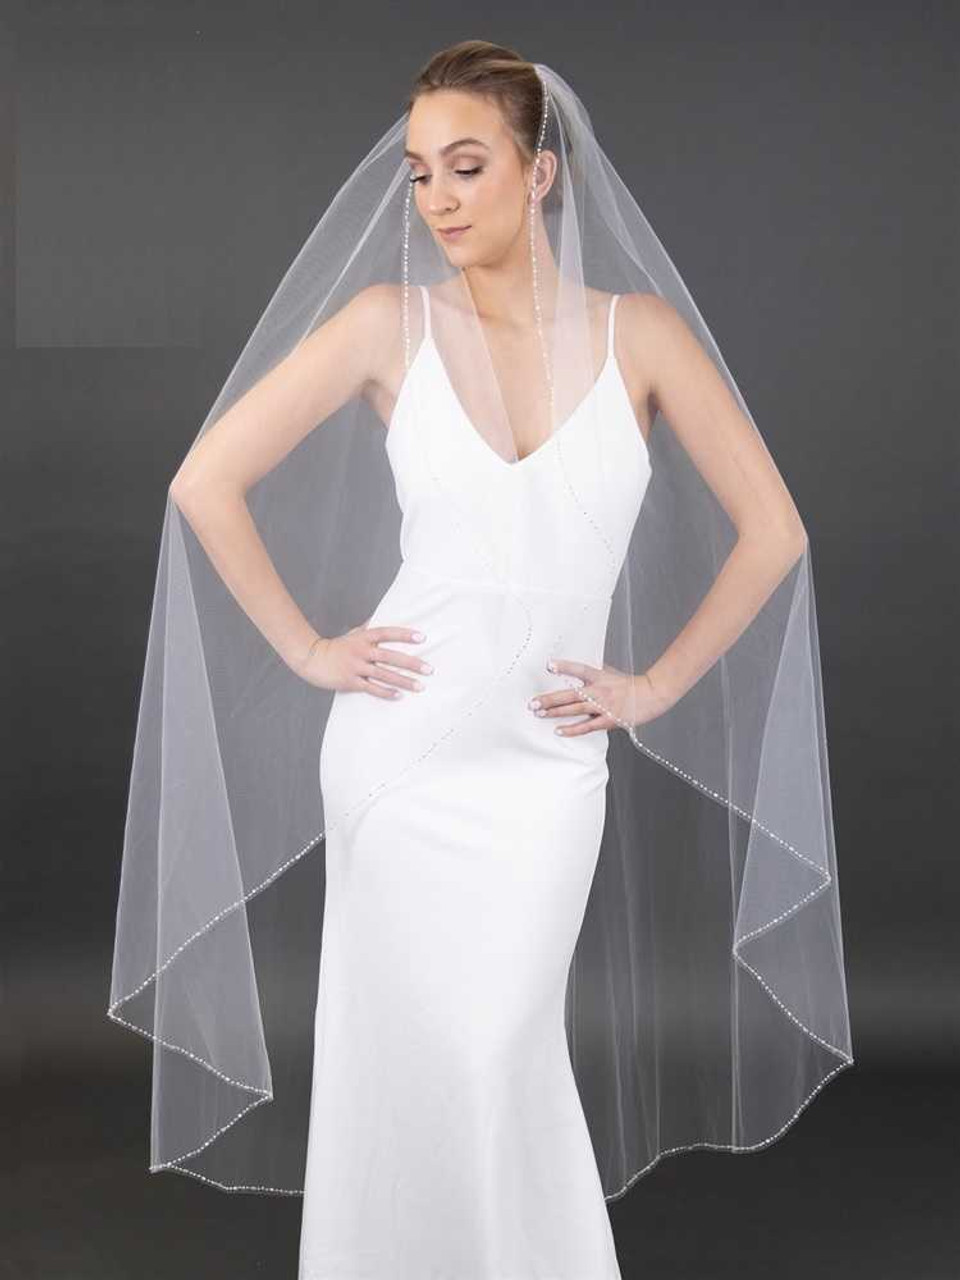 Pearl Bridal Veil, Waltz Lenght One Tier Wedding Veil with Pearls